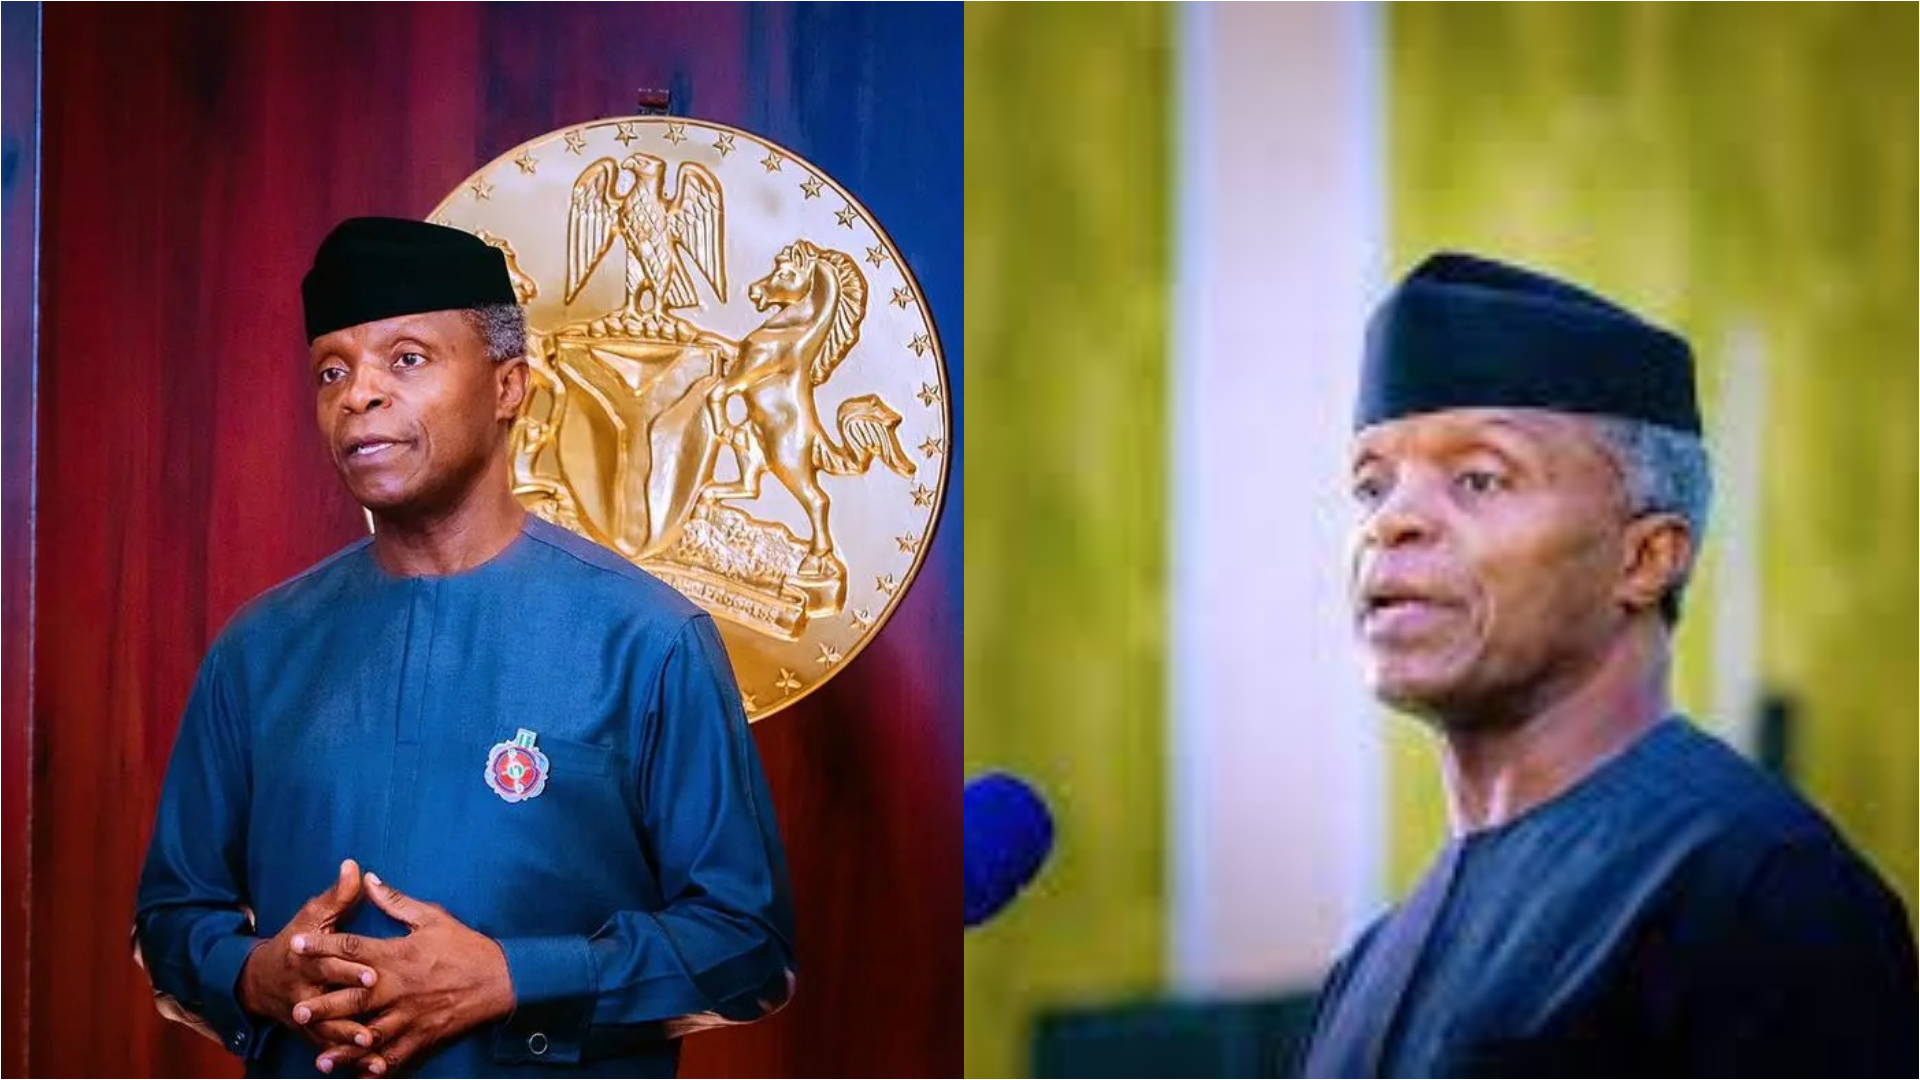 Osinbajo scheduled to deliver speech at King’s College Africa week Monday